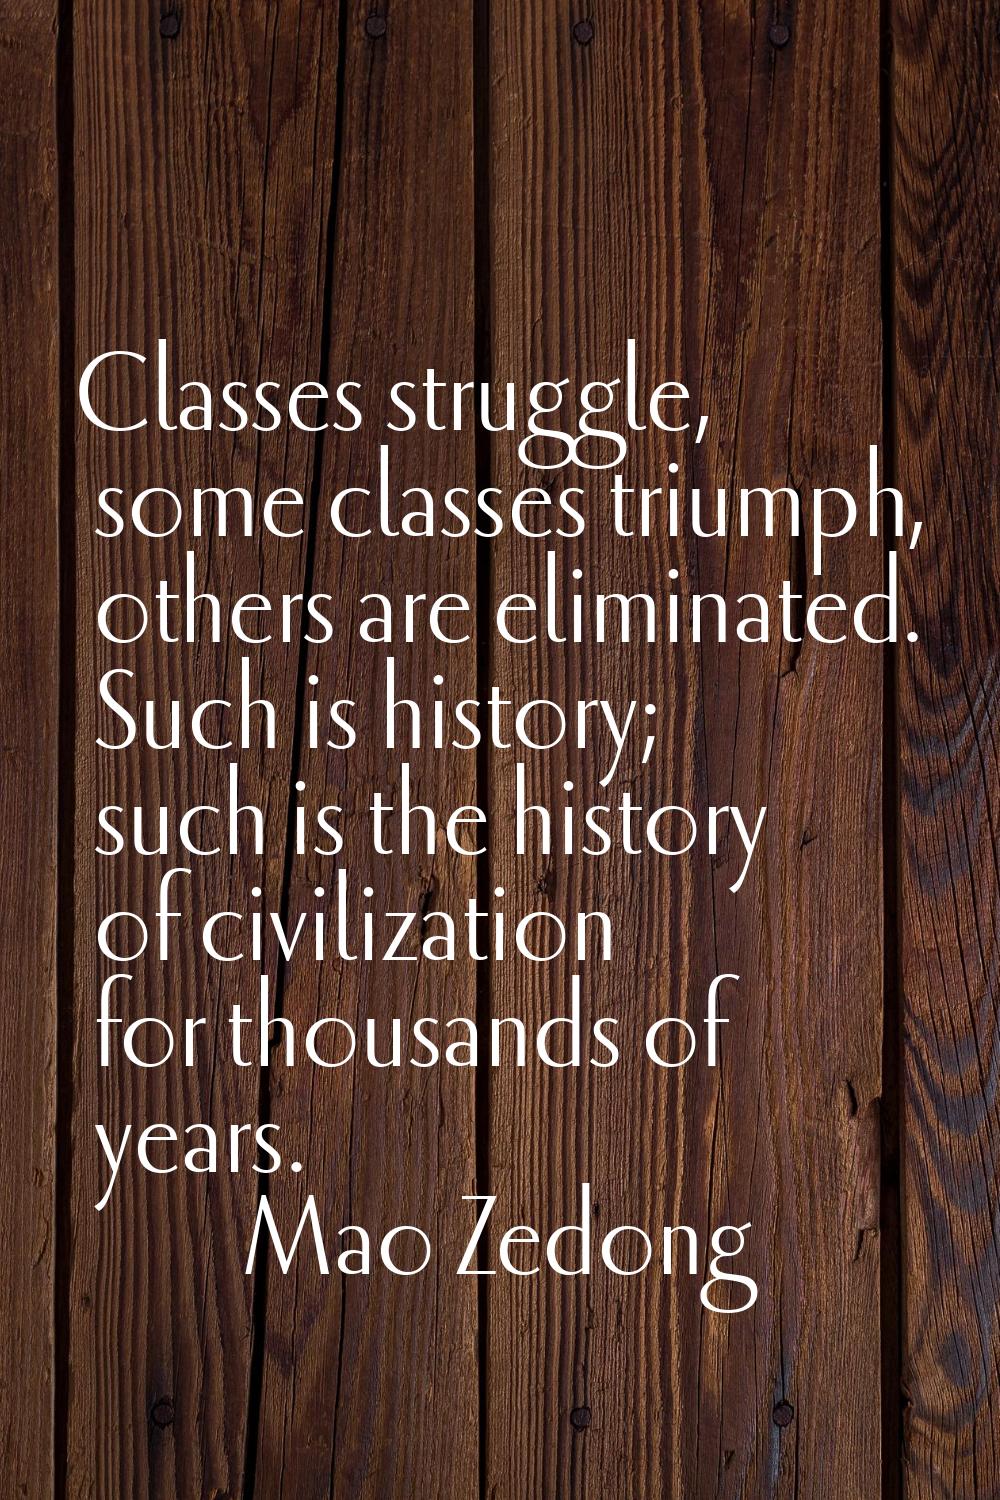 Classes struggle, some classes triumph, others are eliminated. Such is history; such is the history